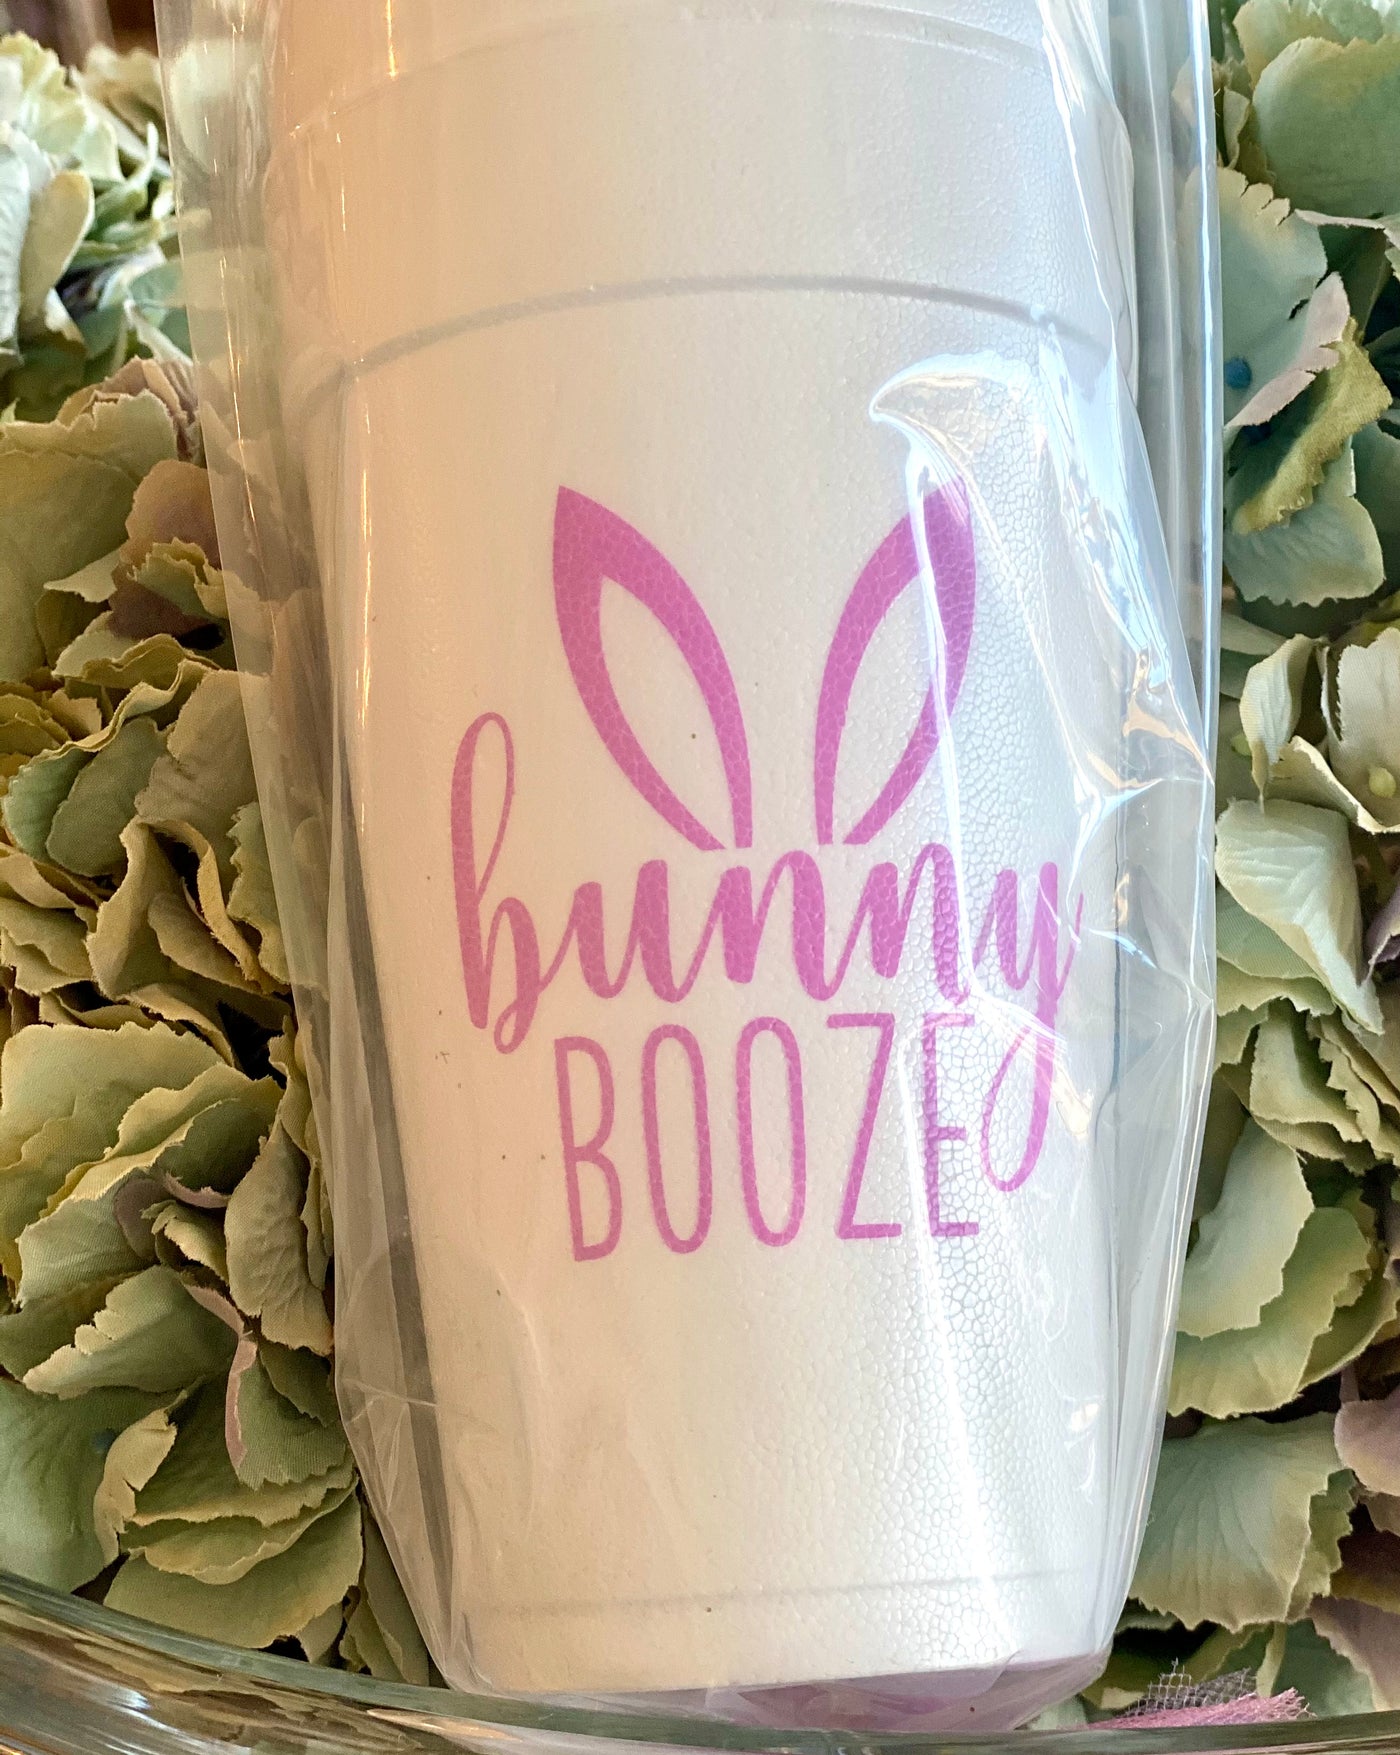 Easter Party Cups Set/10 20 oz